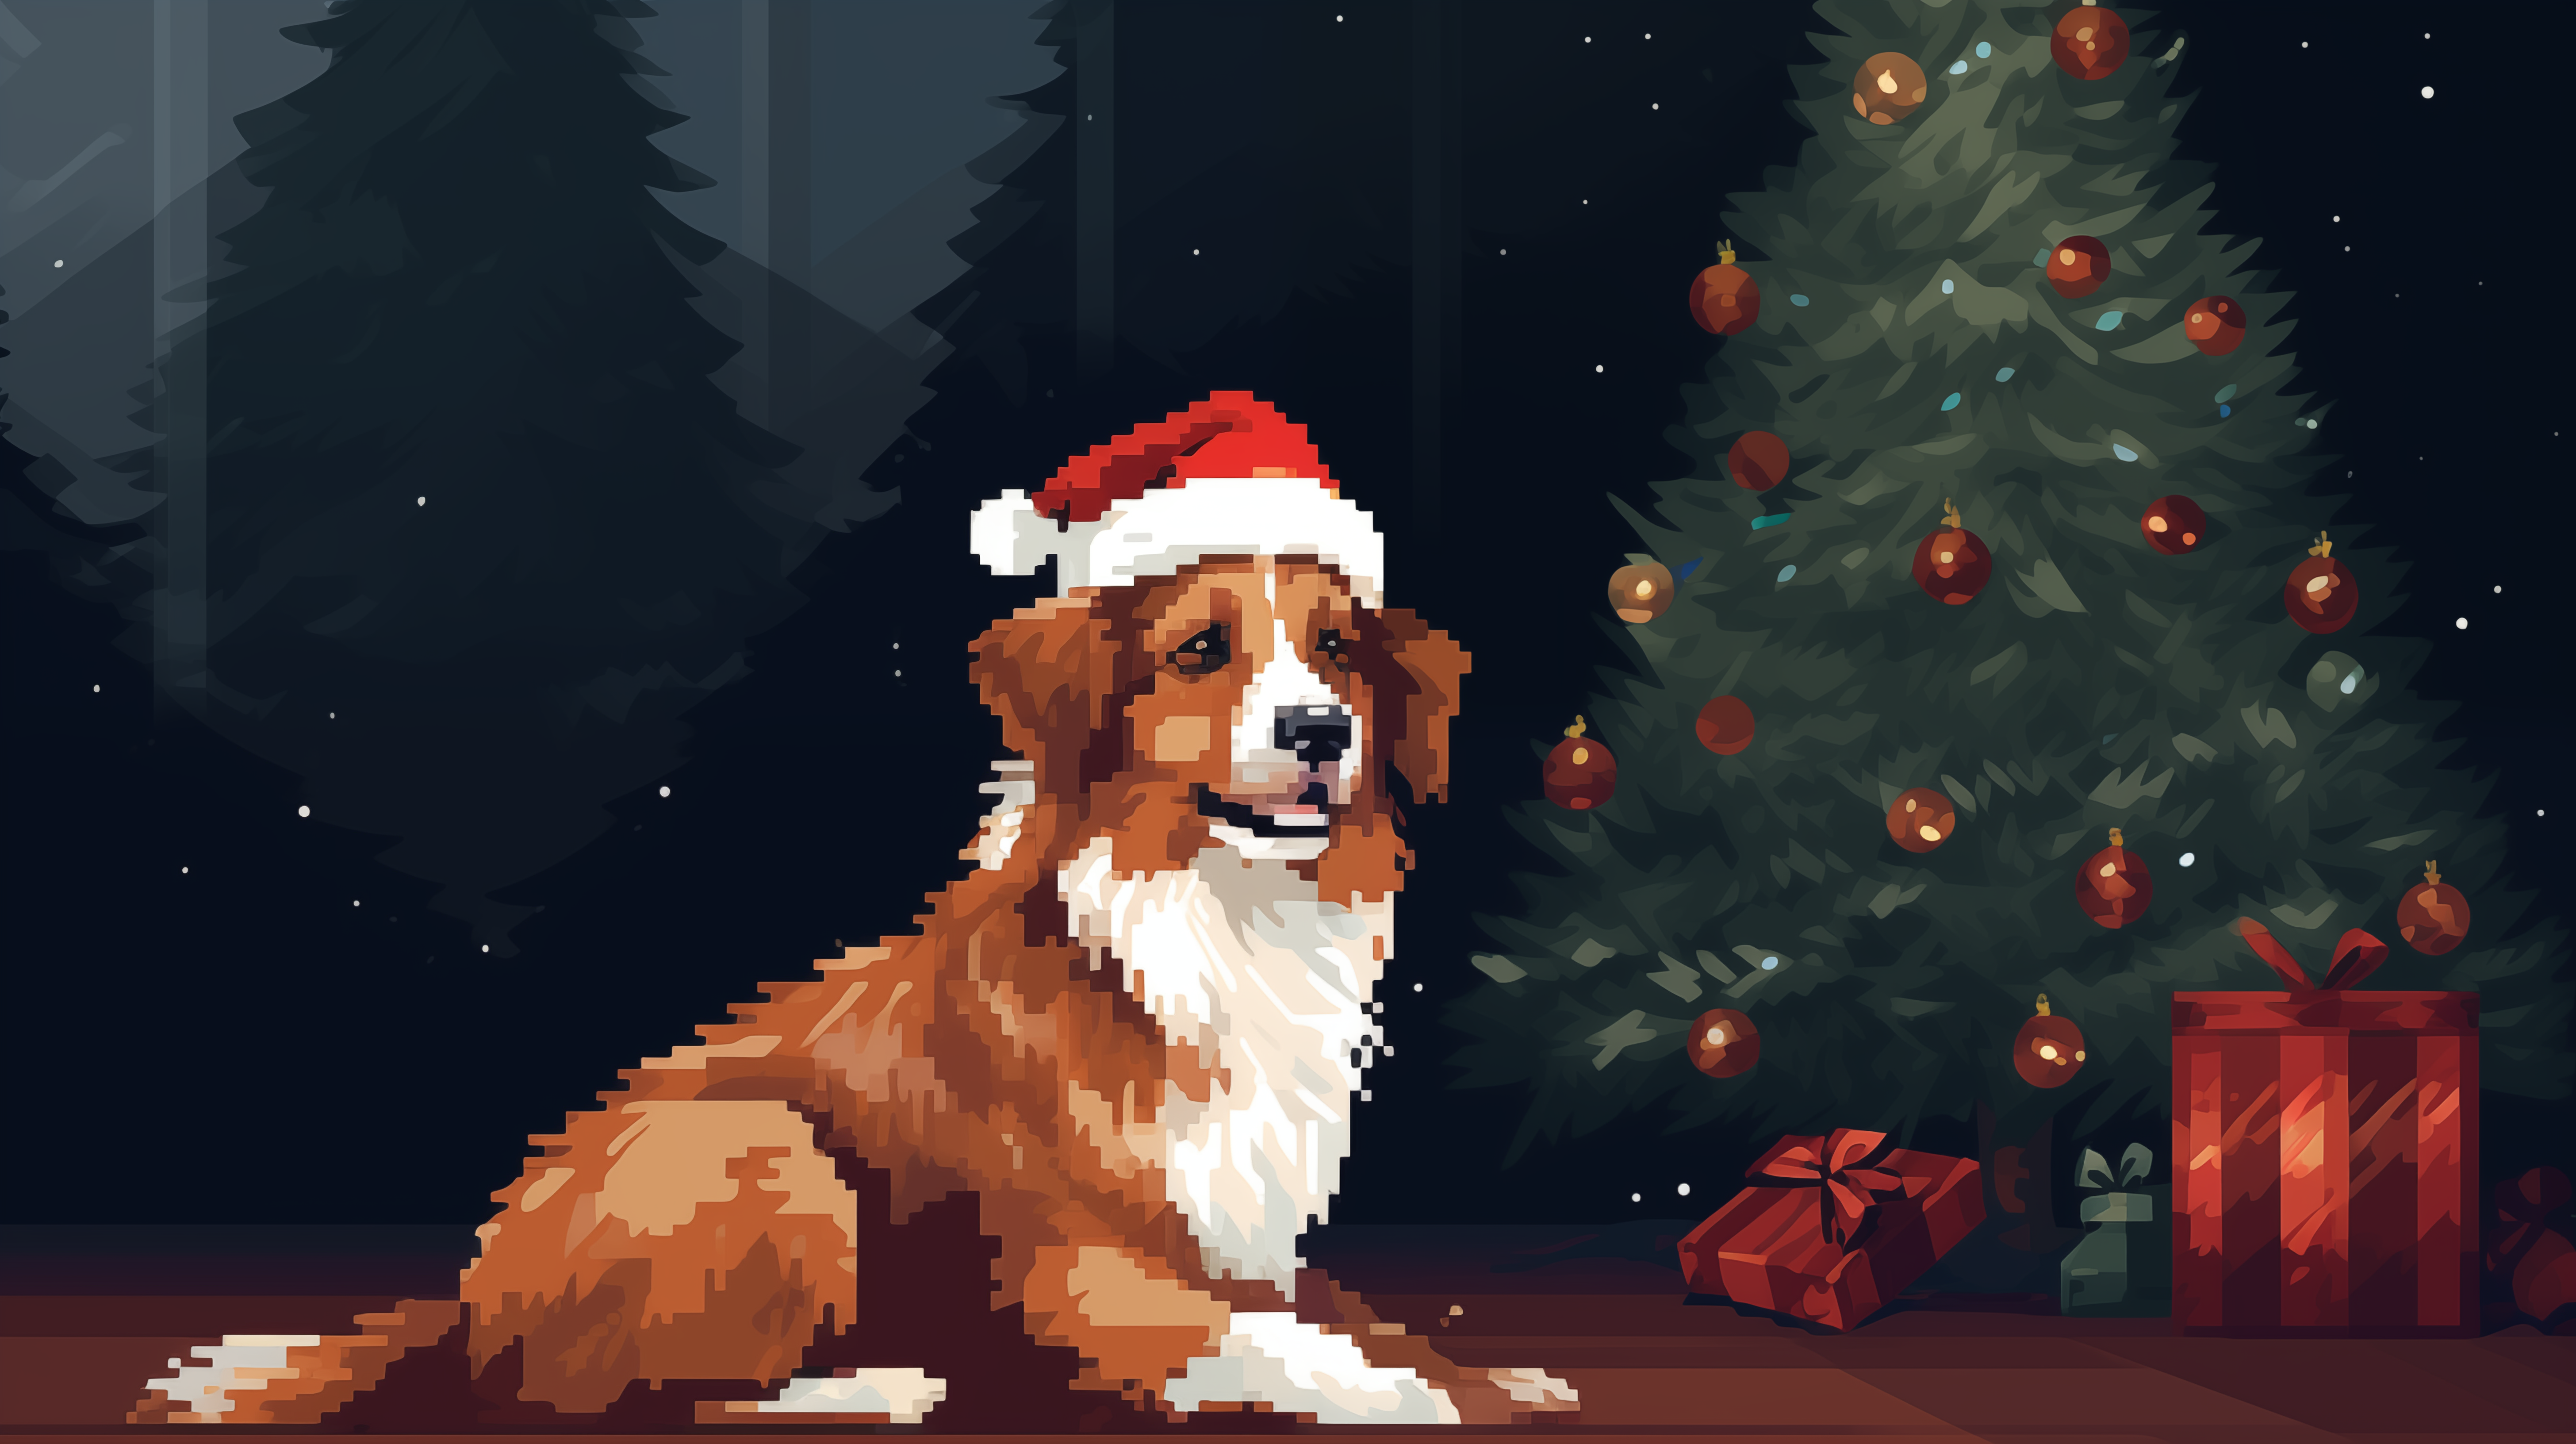 Adorable dog wearing a Santa hat sitting beside a decorated Christmas tree with presents, perfect for festive HD desktop wallpaper.